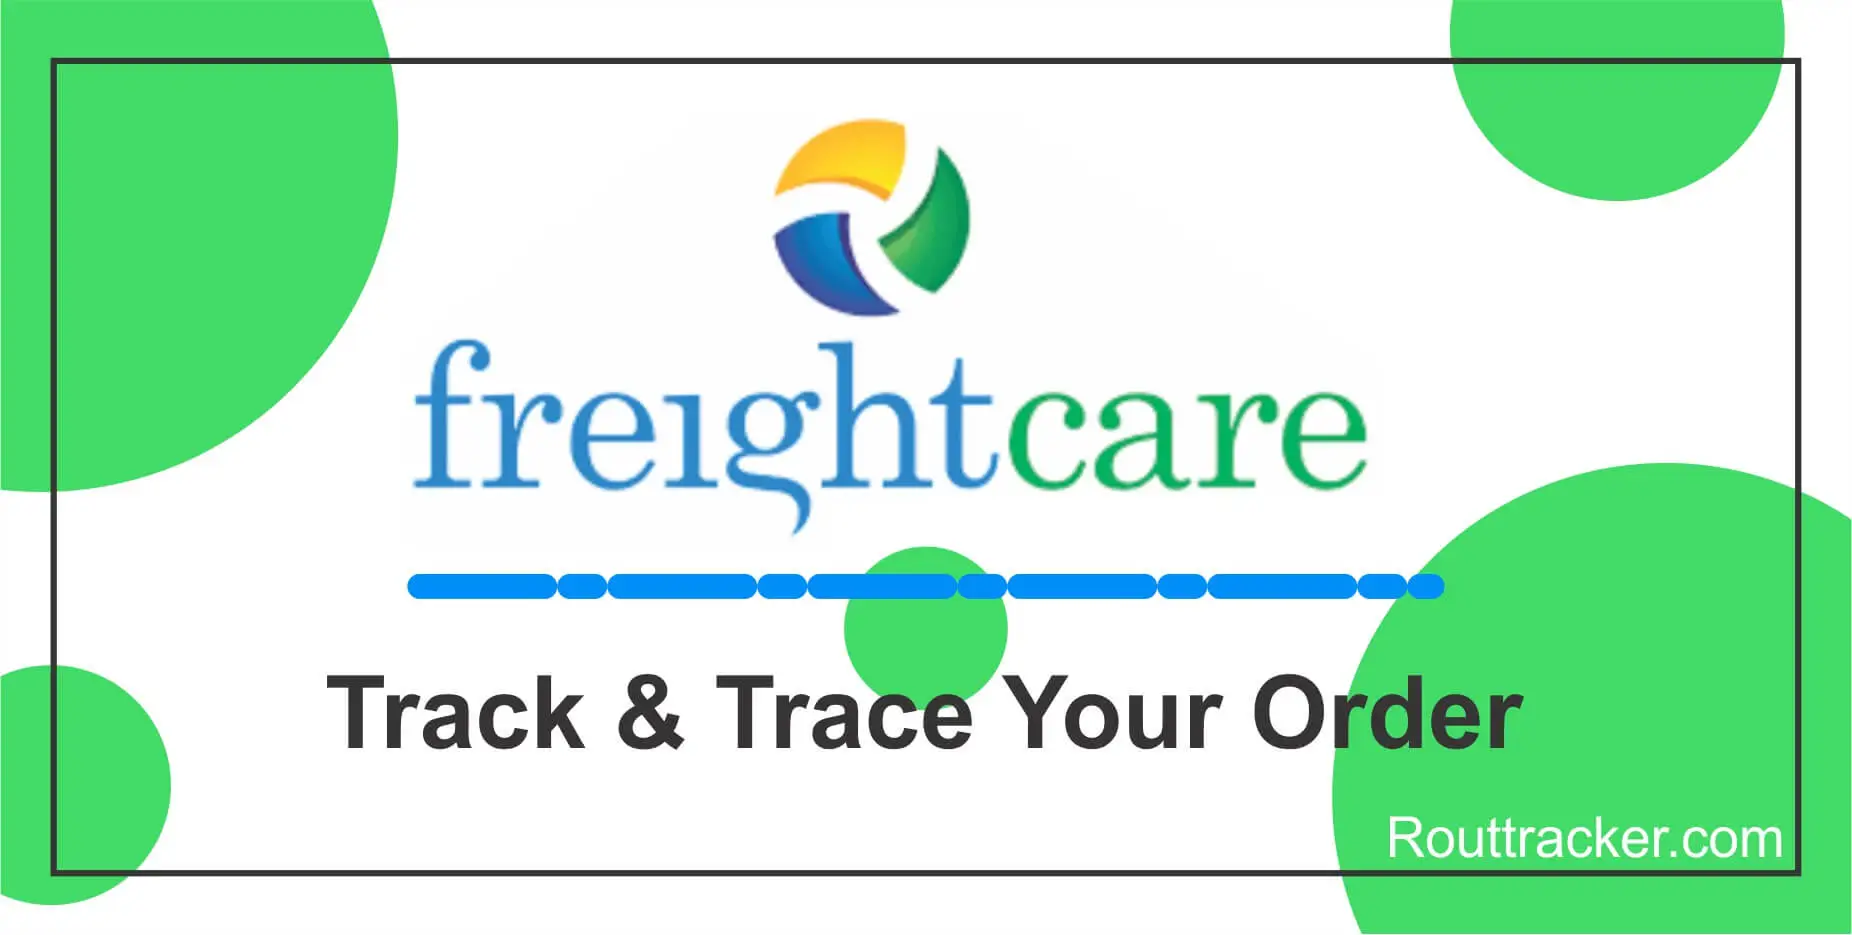 Freight Care Tracking